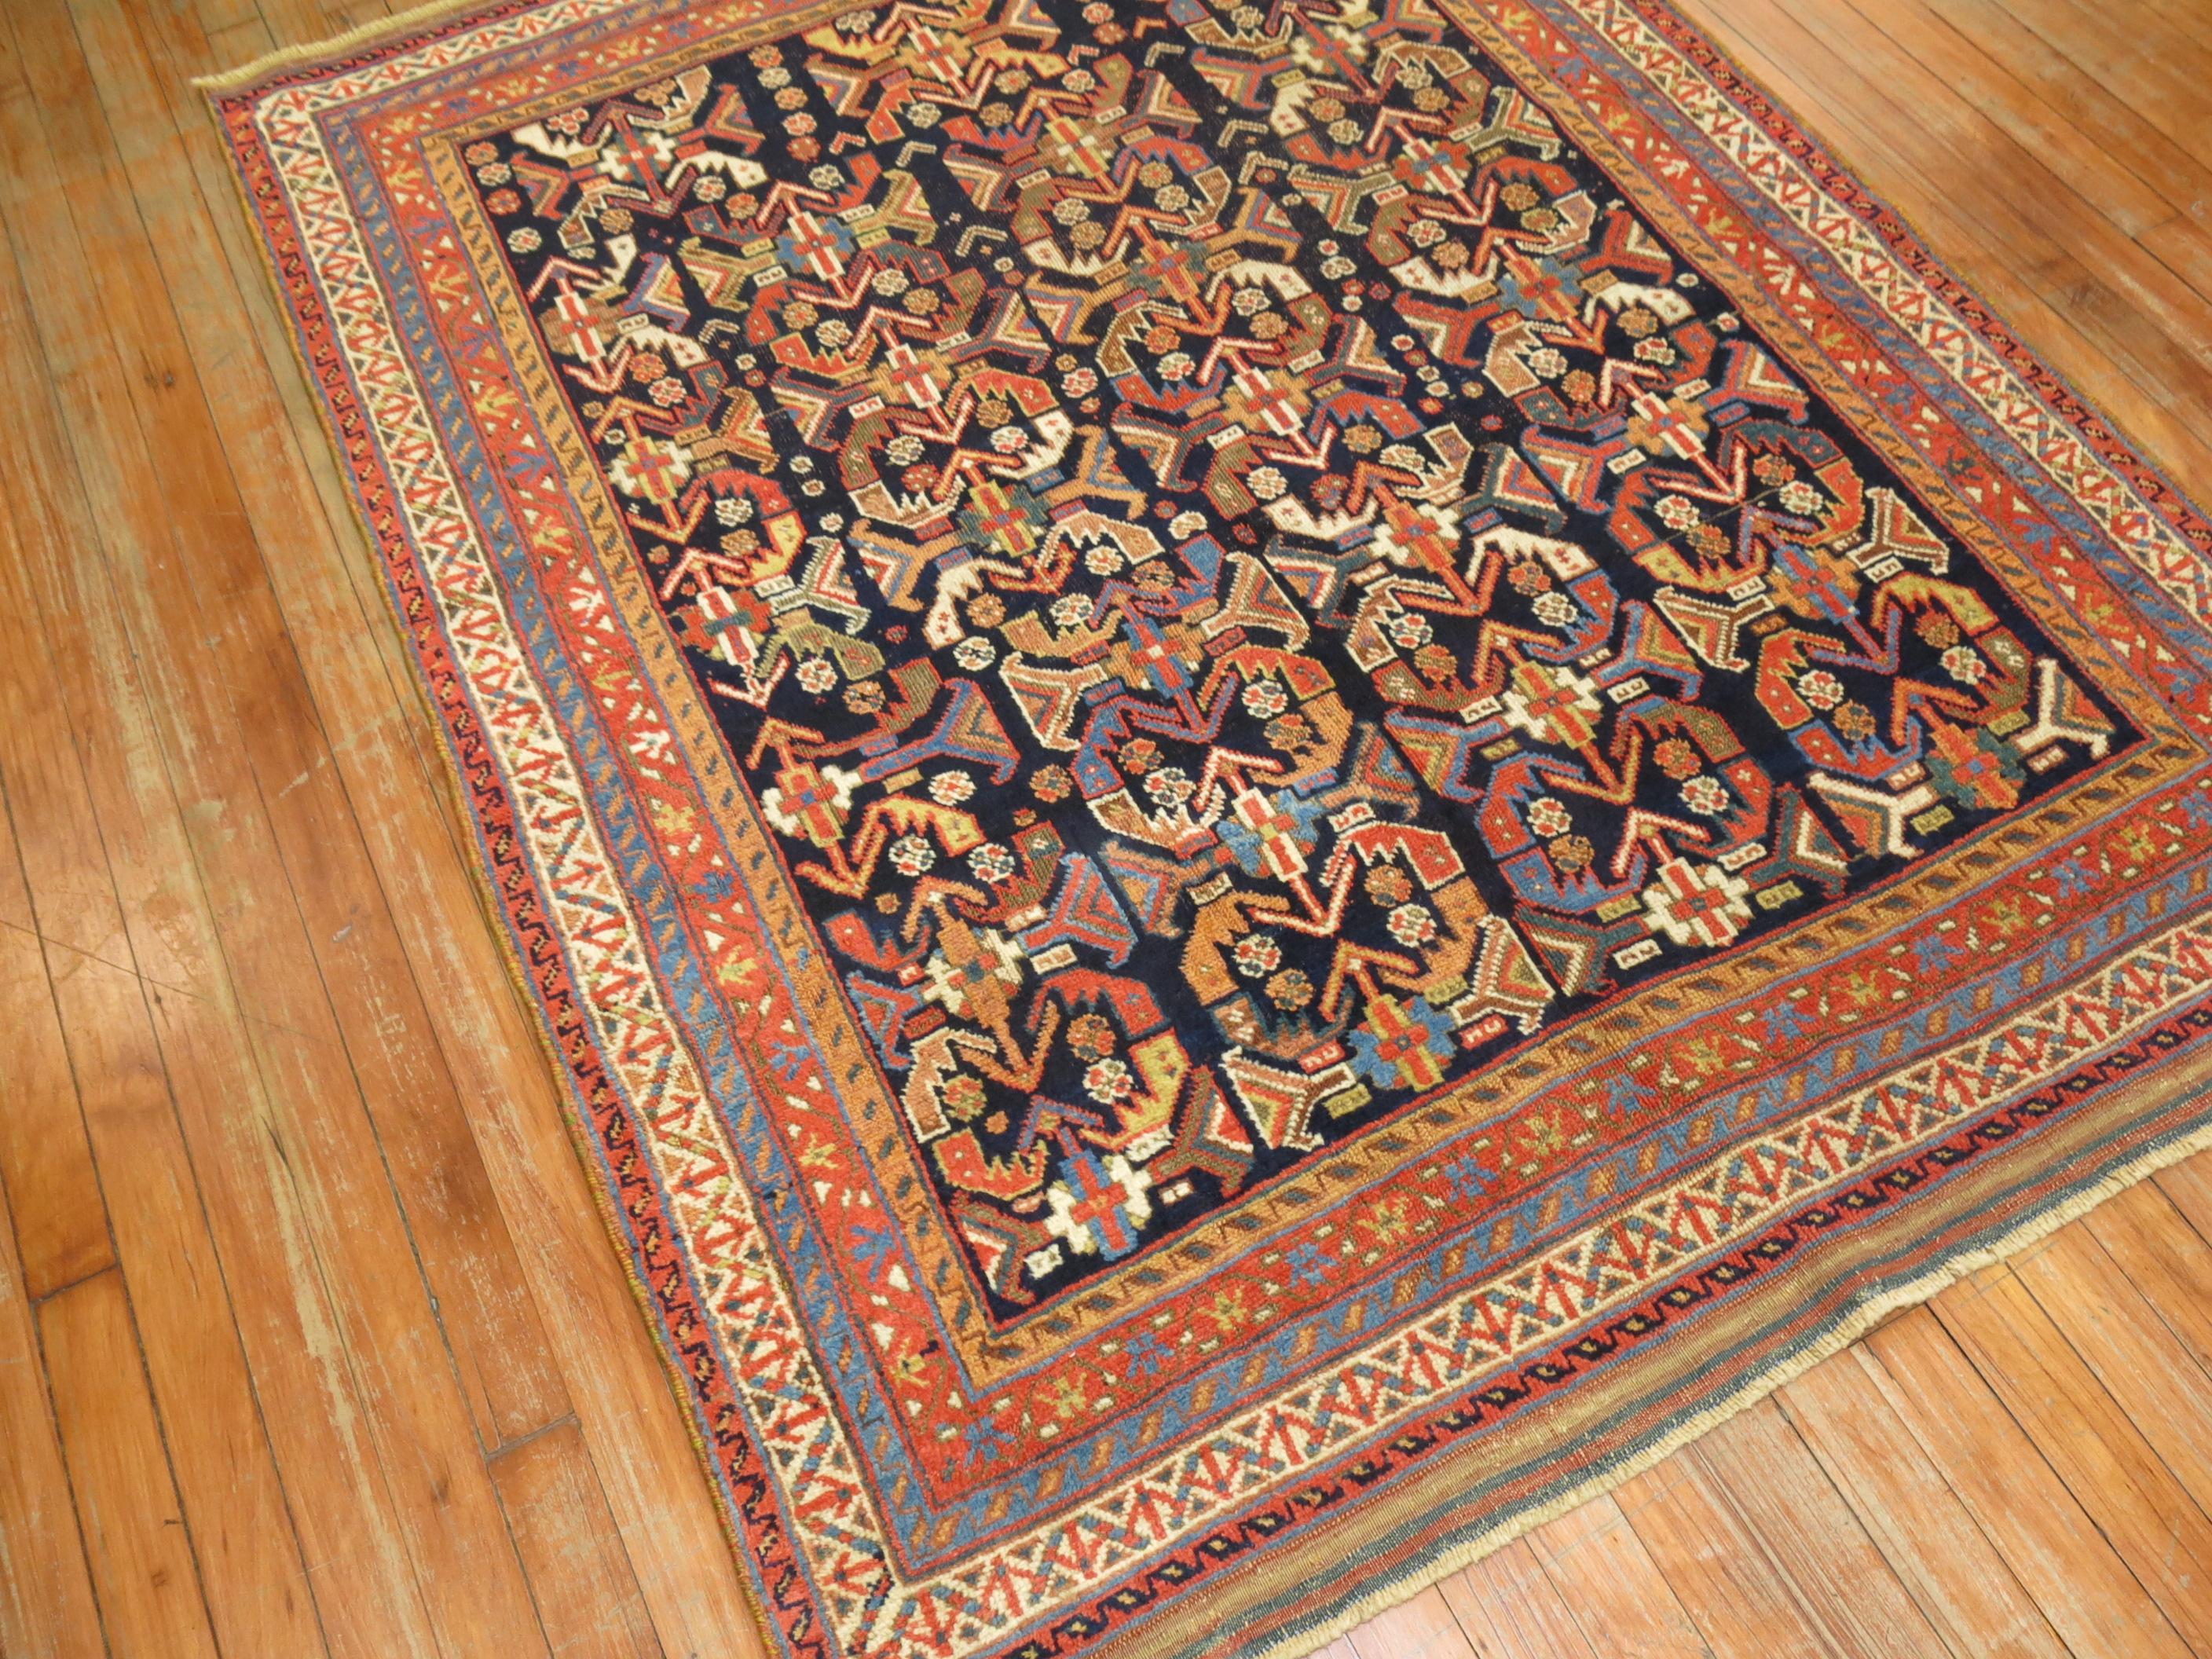 An early 20th century Persian Tribal Afshar rug

Measures: 4'3